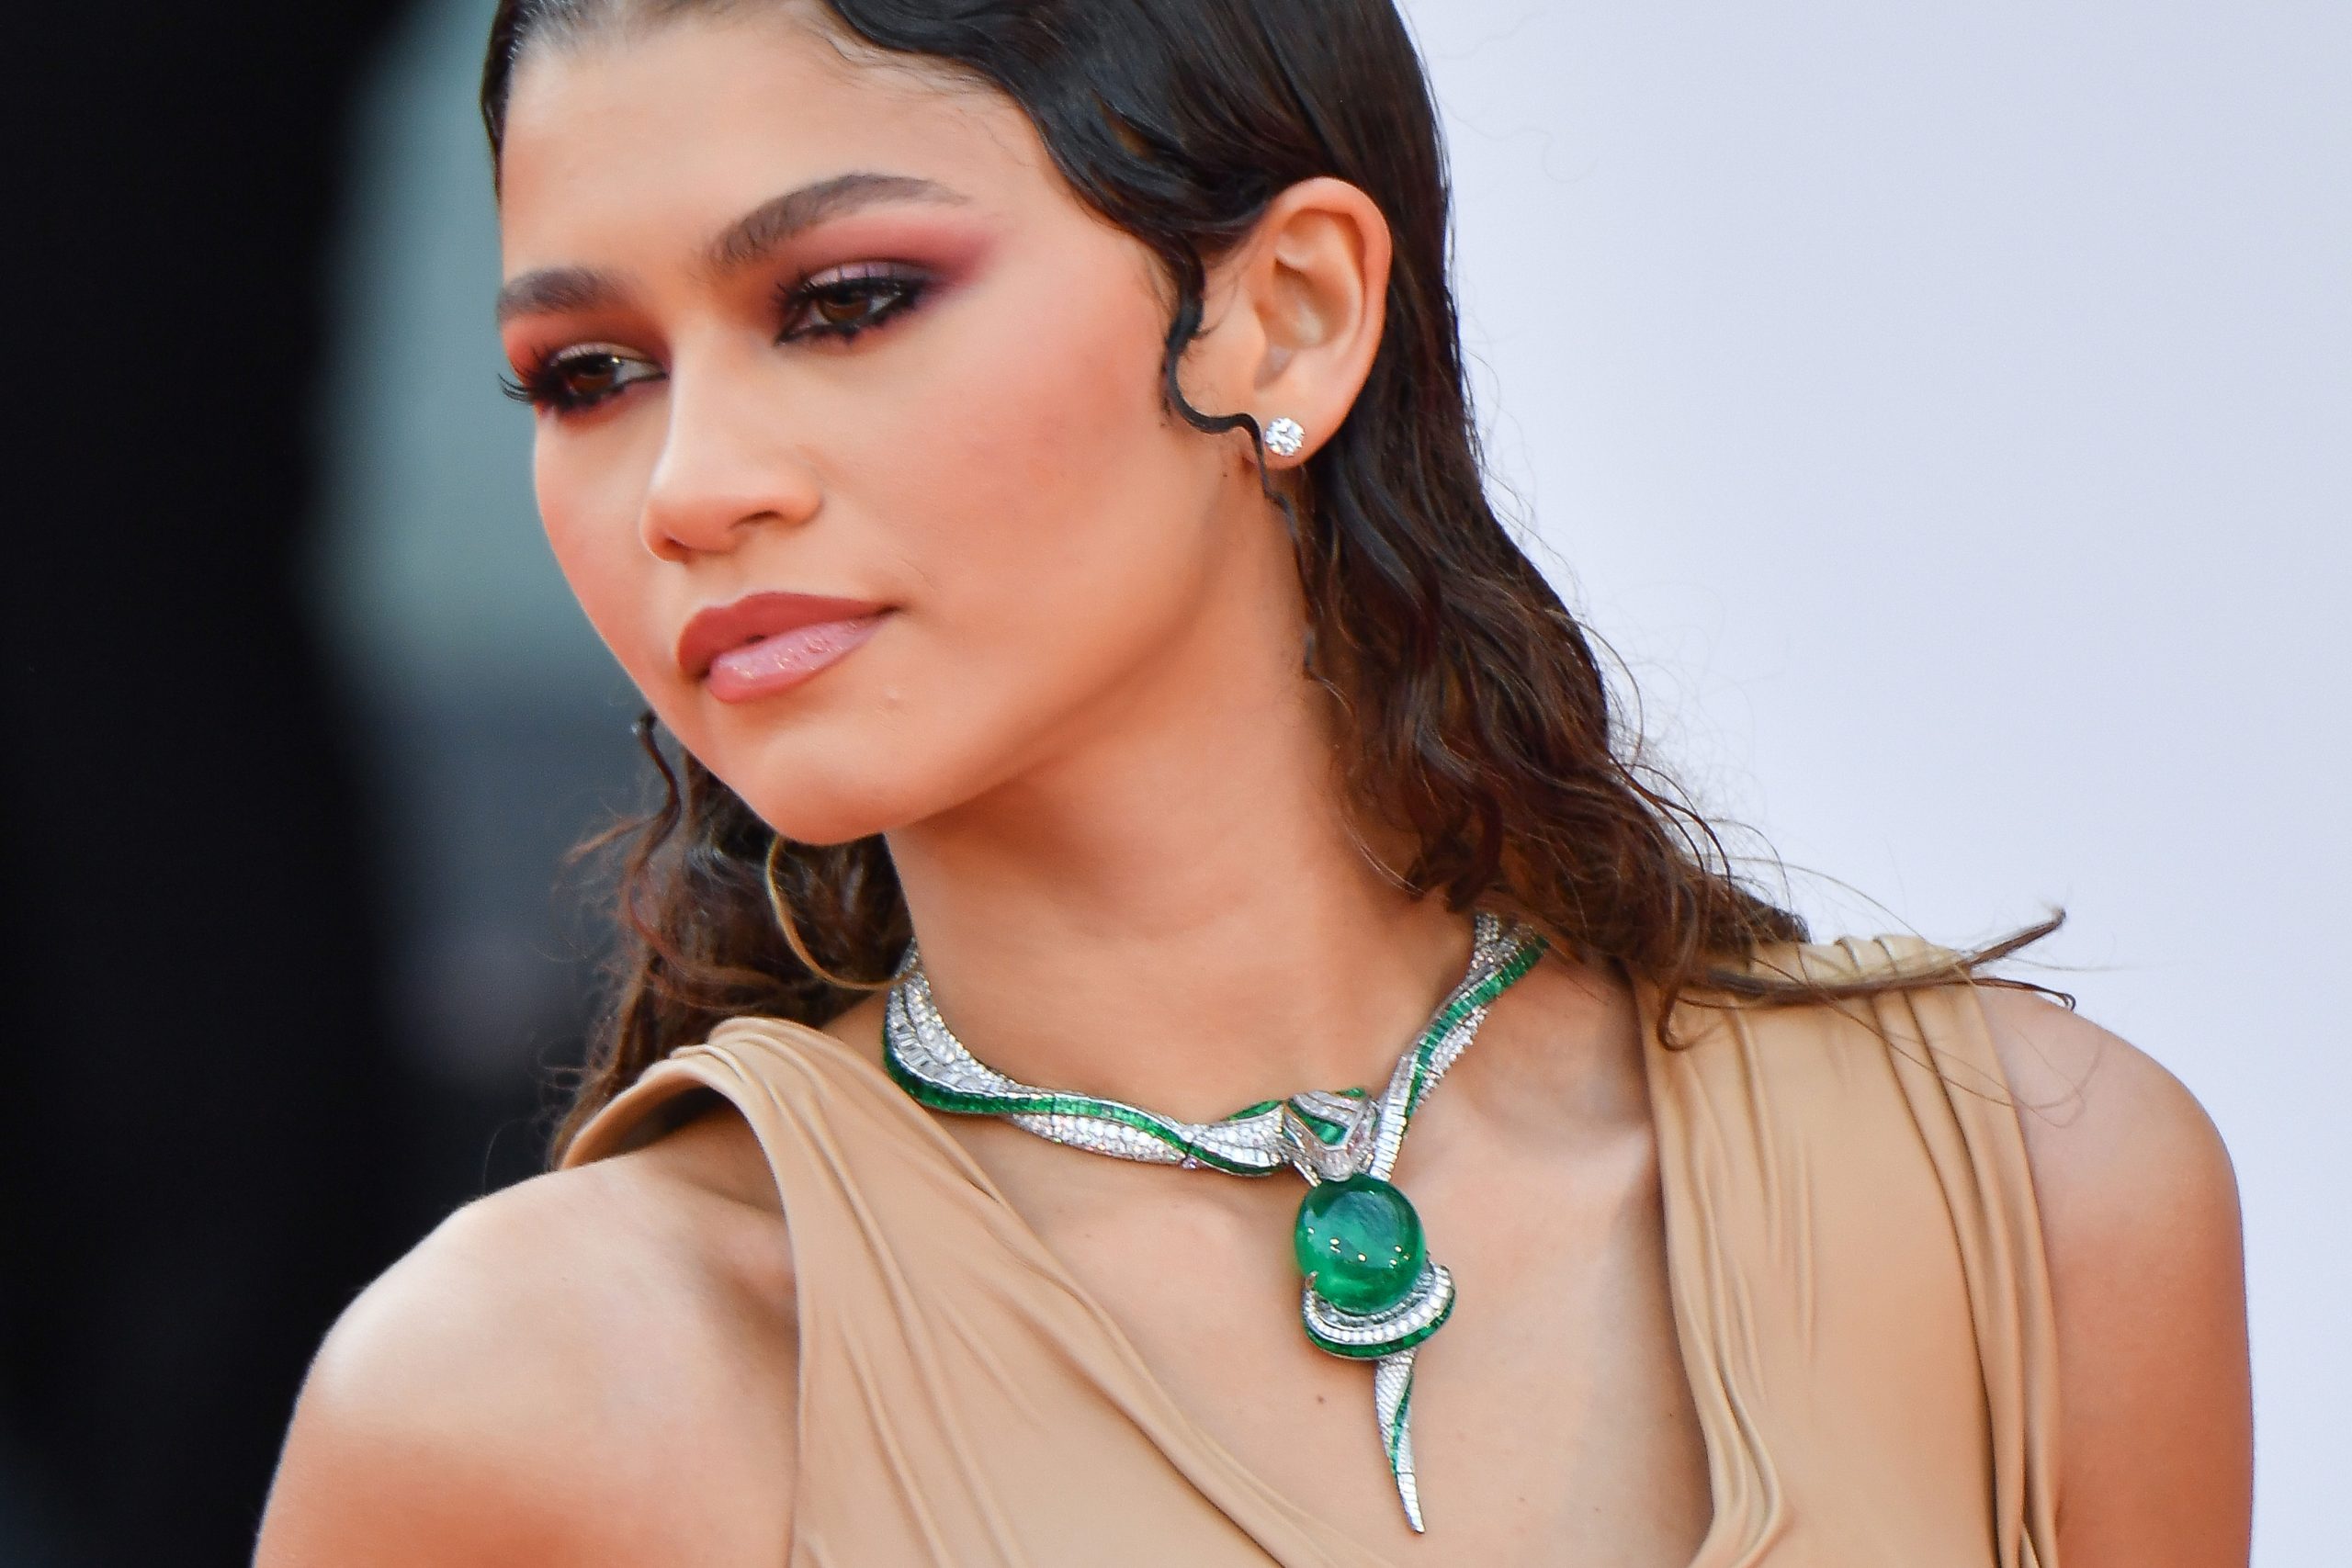 See How Bulgari Created a 93.83-Carat Emerald Necklace Worn by